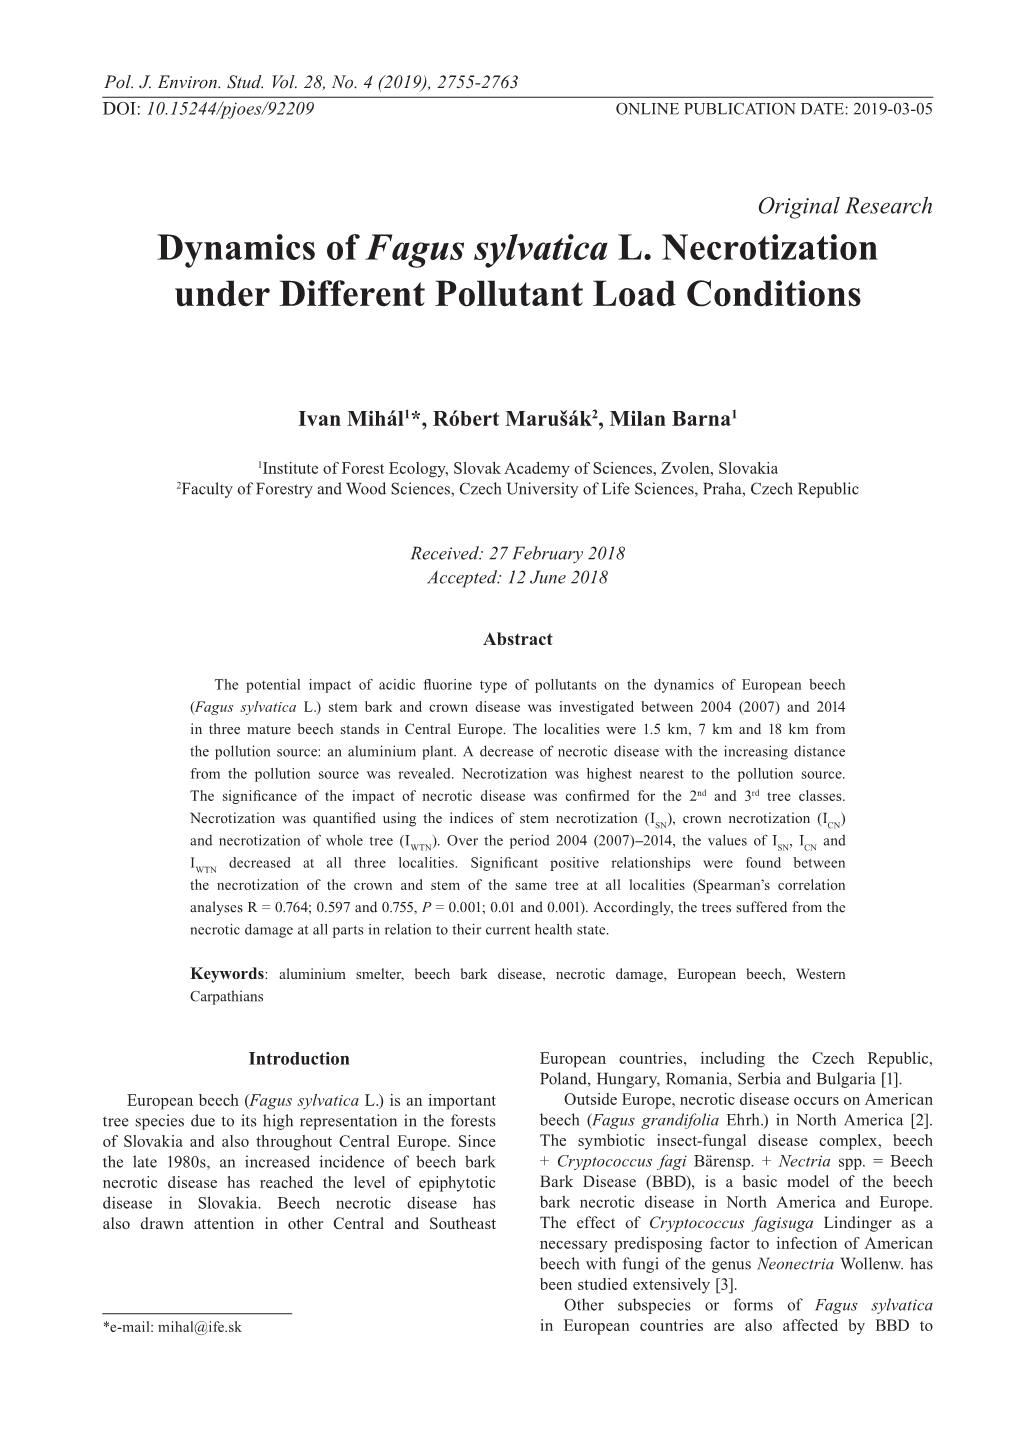 Dynamics of Fagus Sylvatica L. Necrotization Under Different Pollutant Load Conditions